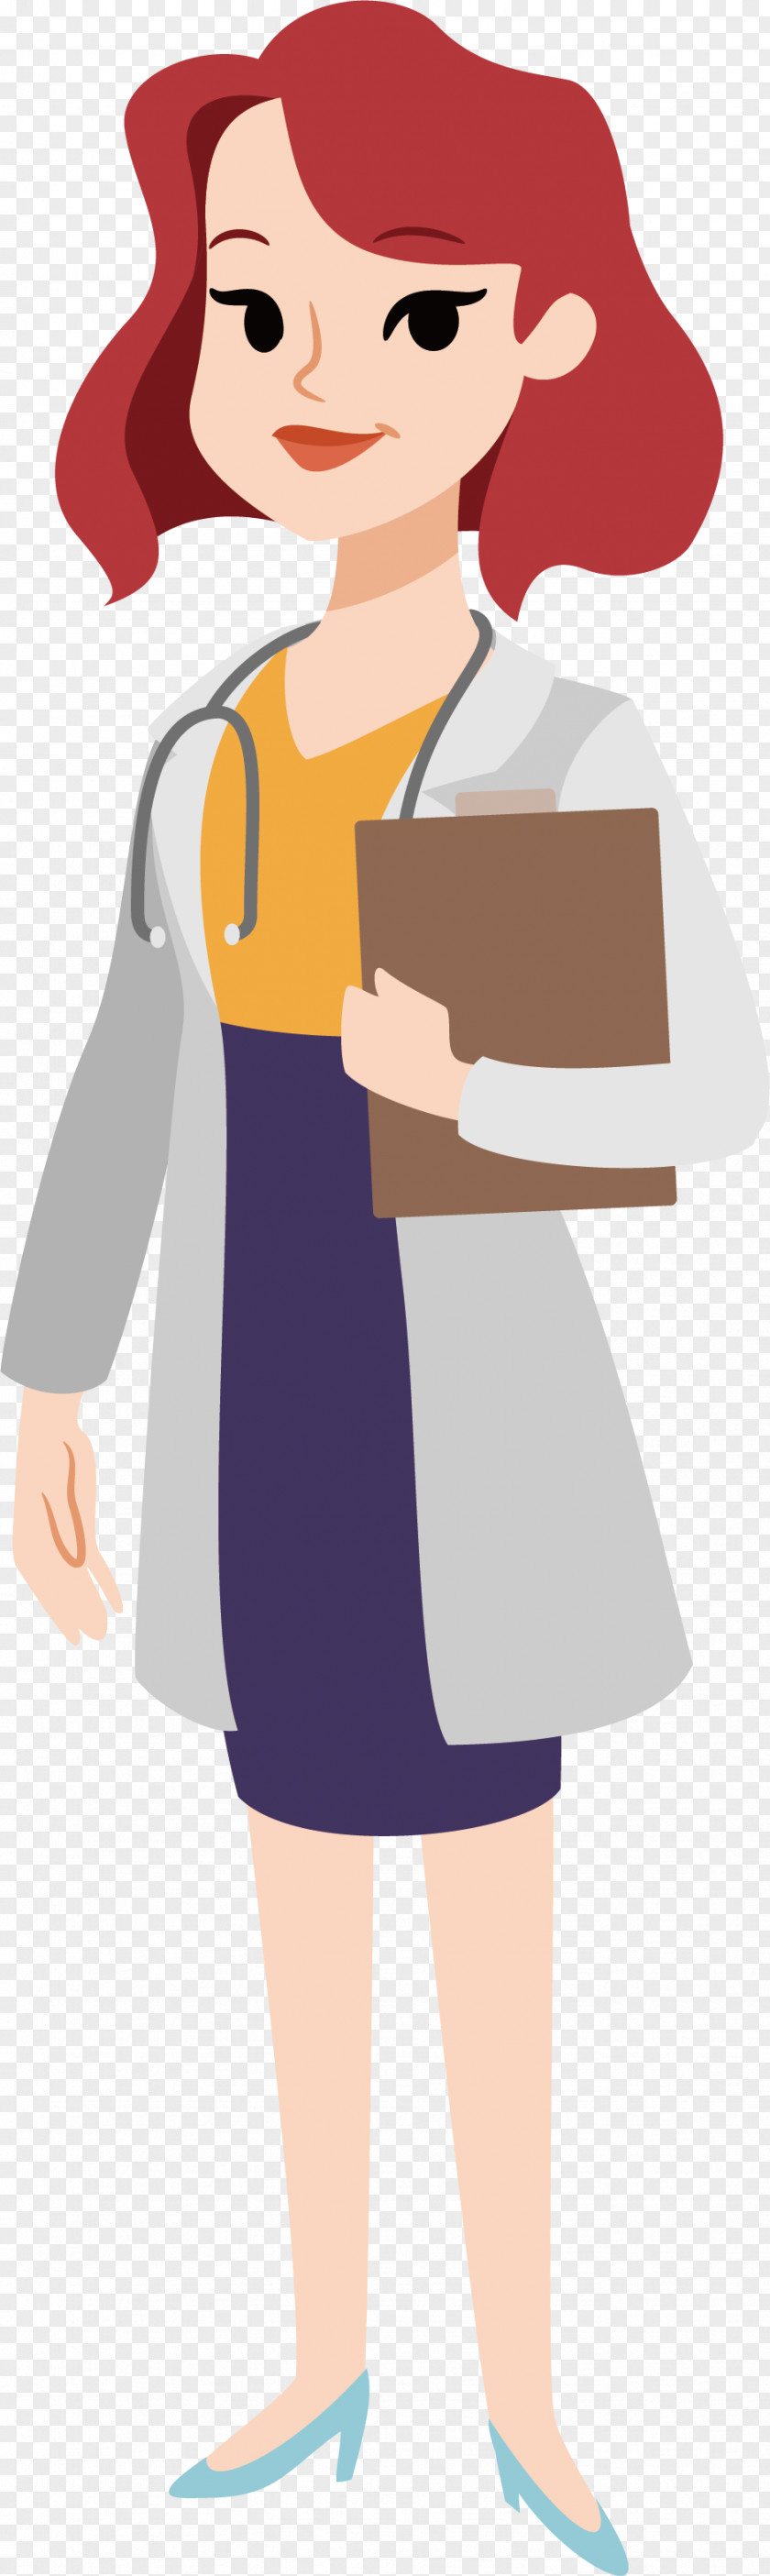 The Red Haired Woman Doctor Primary Care Physician Medicine Clip Art PNG